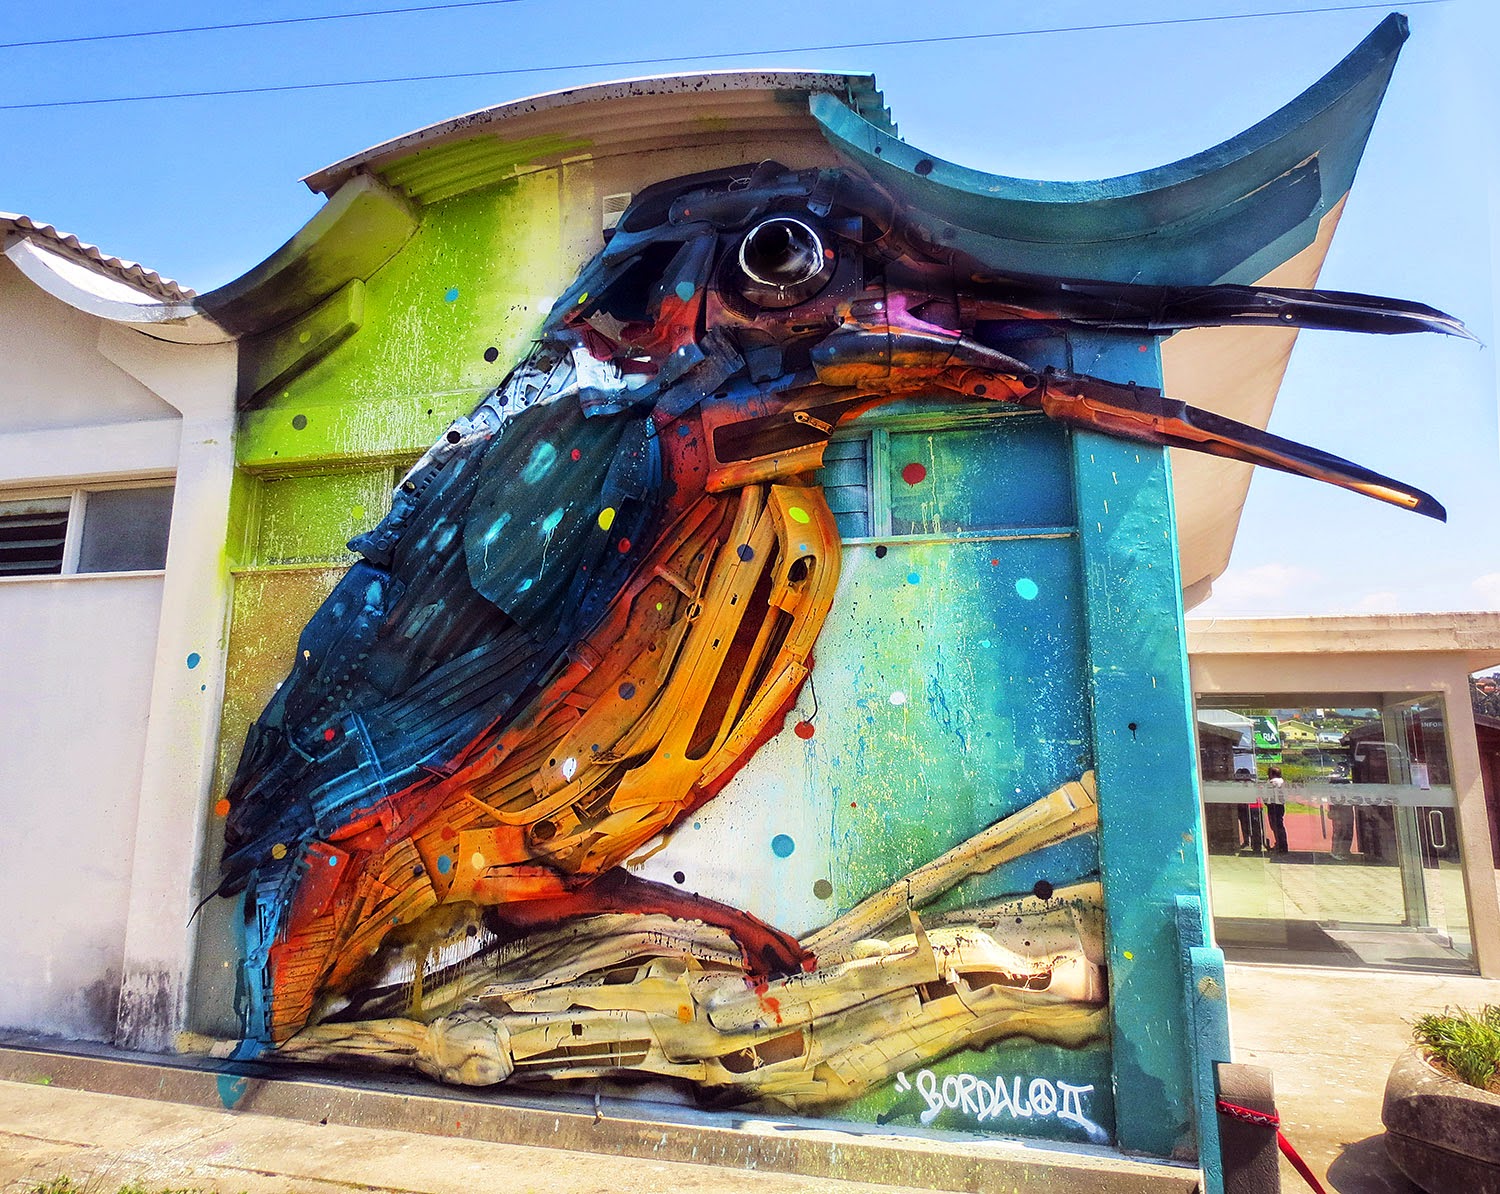 Our buddy Bordalo II was recently invited for the Estarreja Birdwatching Fair in Portugal where he worked on a brand new street installation.